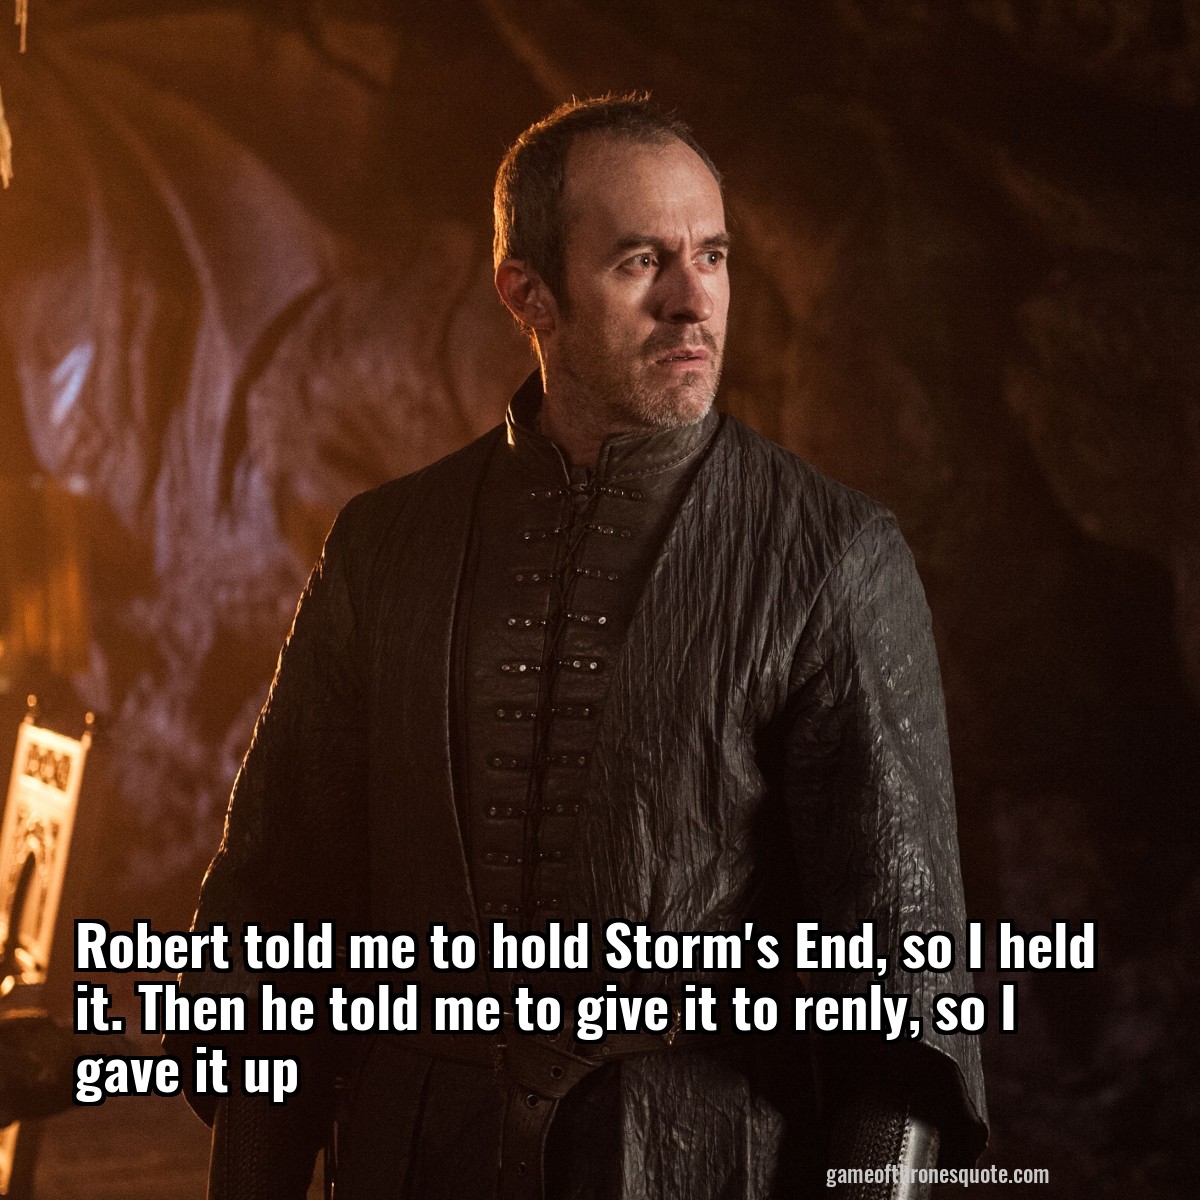 Stannis Baratheon Robert Told Me To Hold Storm S End So I Held It Then He Game Of Thrones Quote